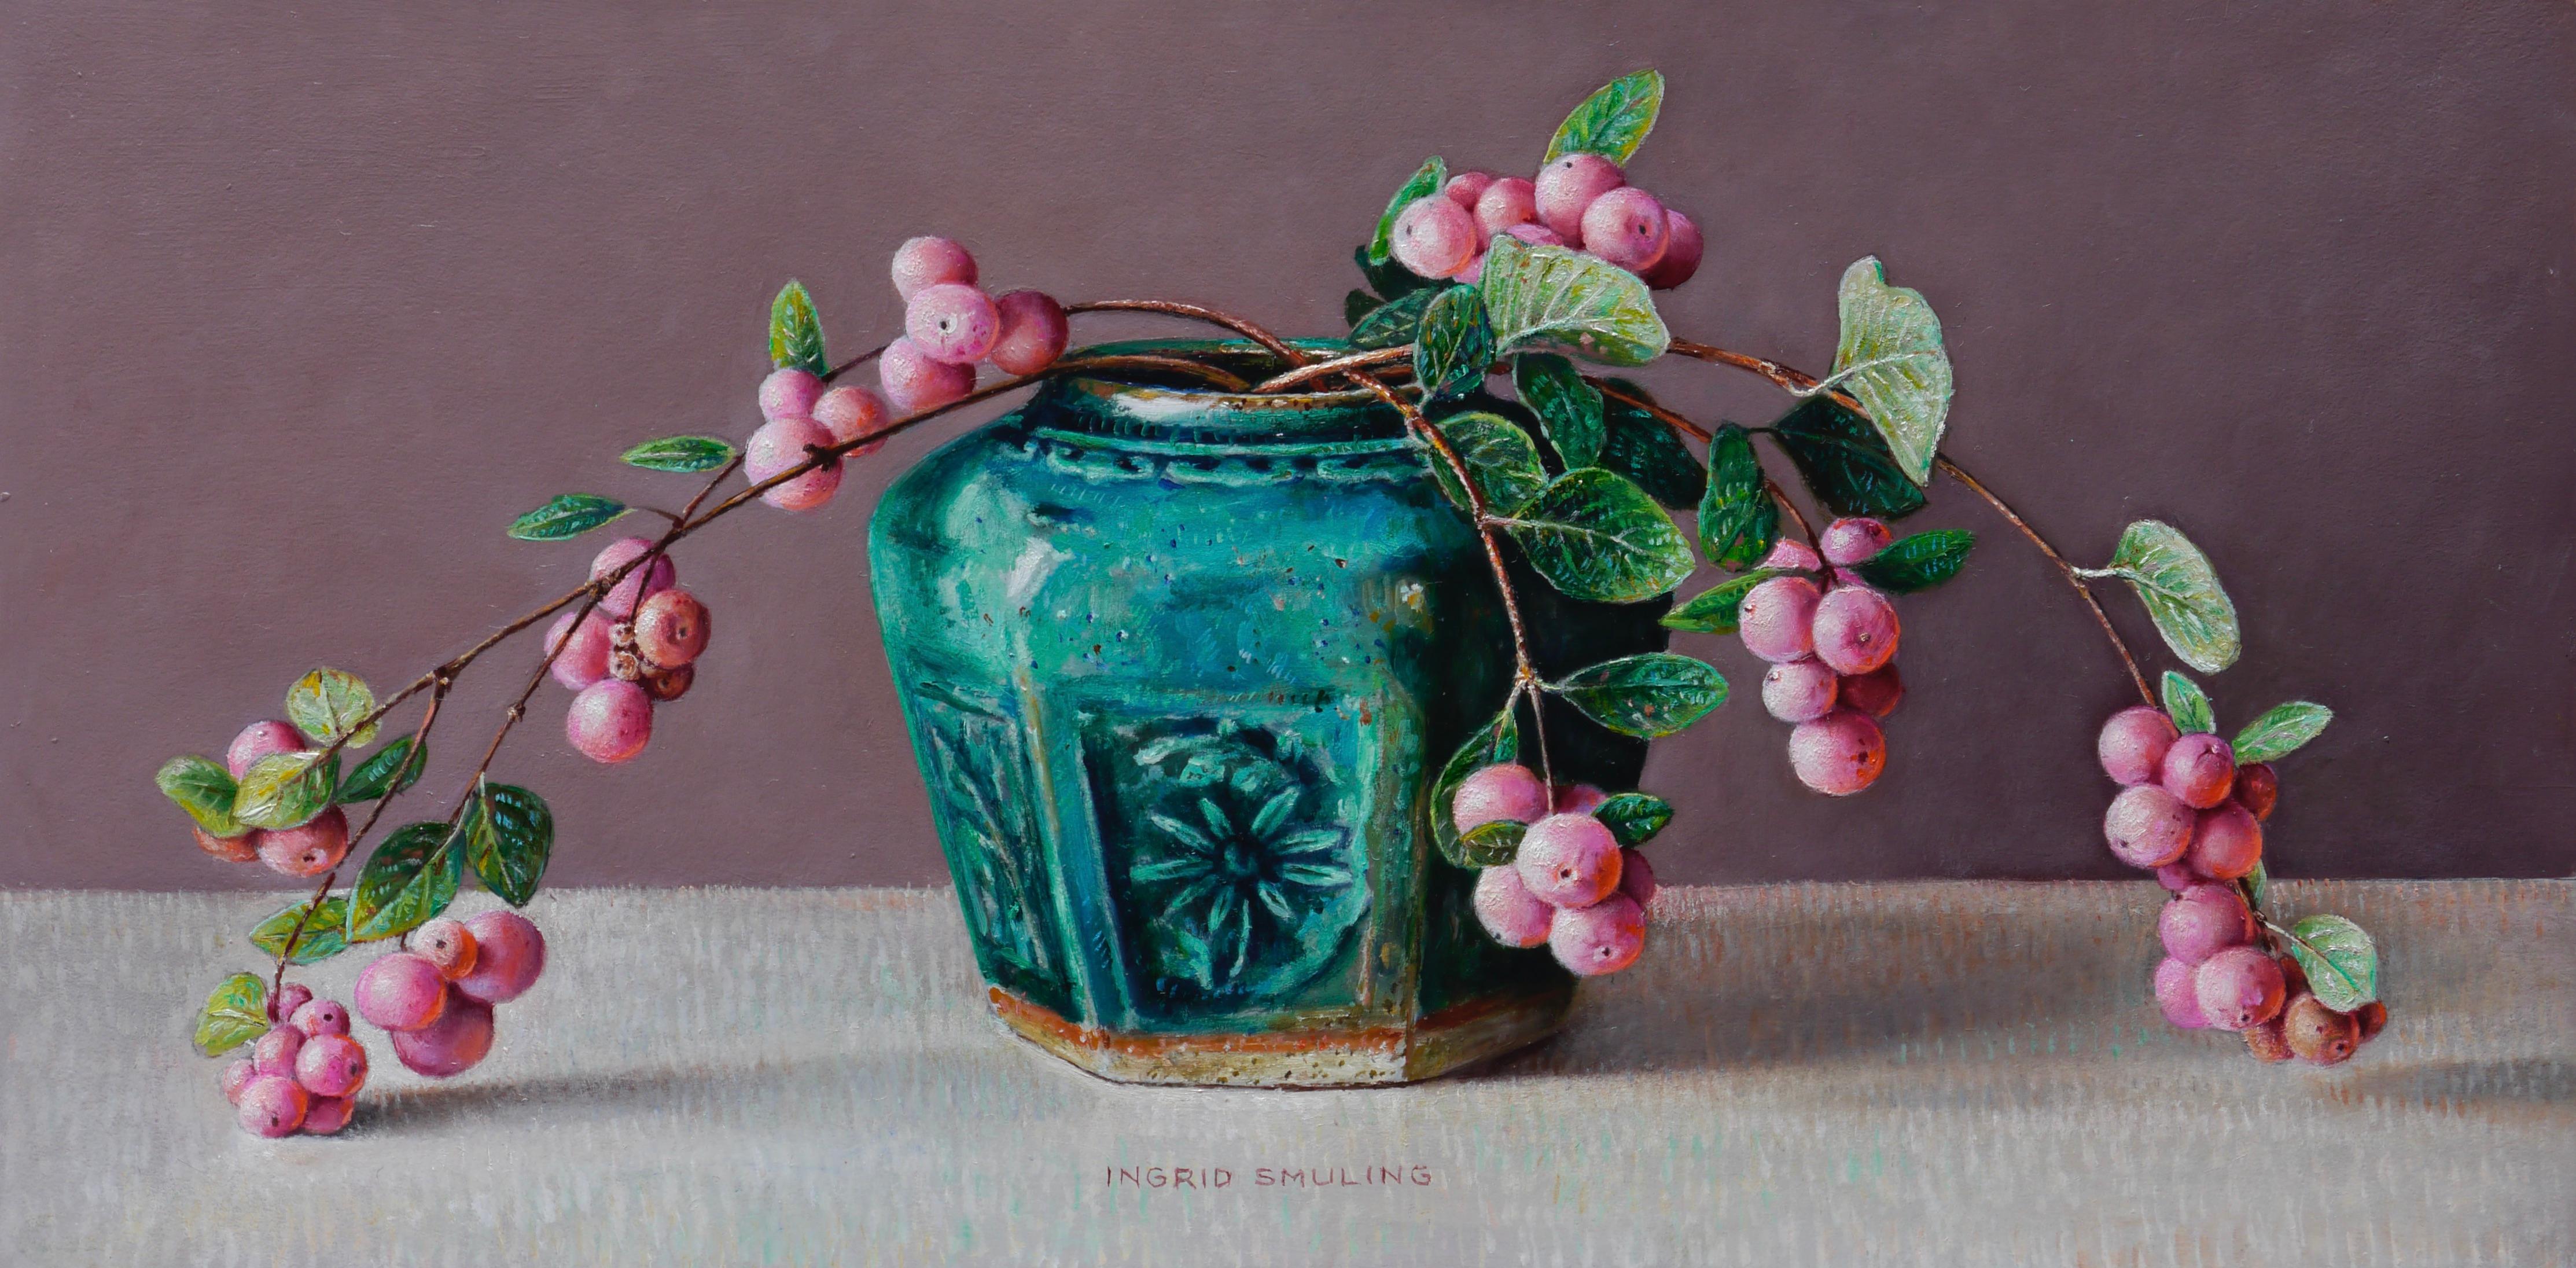 Ingrid Smuling Figurative Painting - Green Ginger jar with snowberries- 21st Century Contemporary Still-life Painting